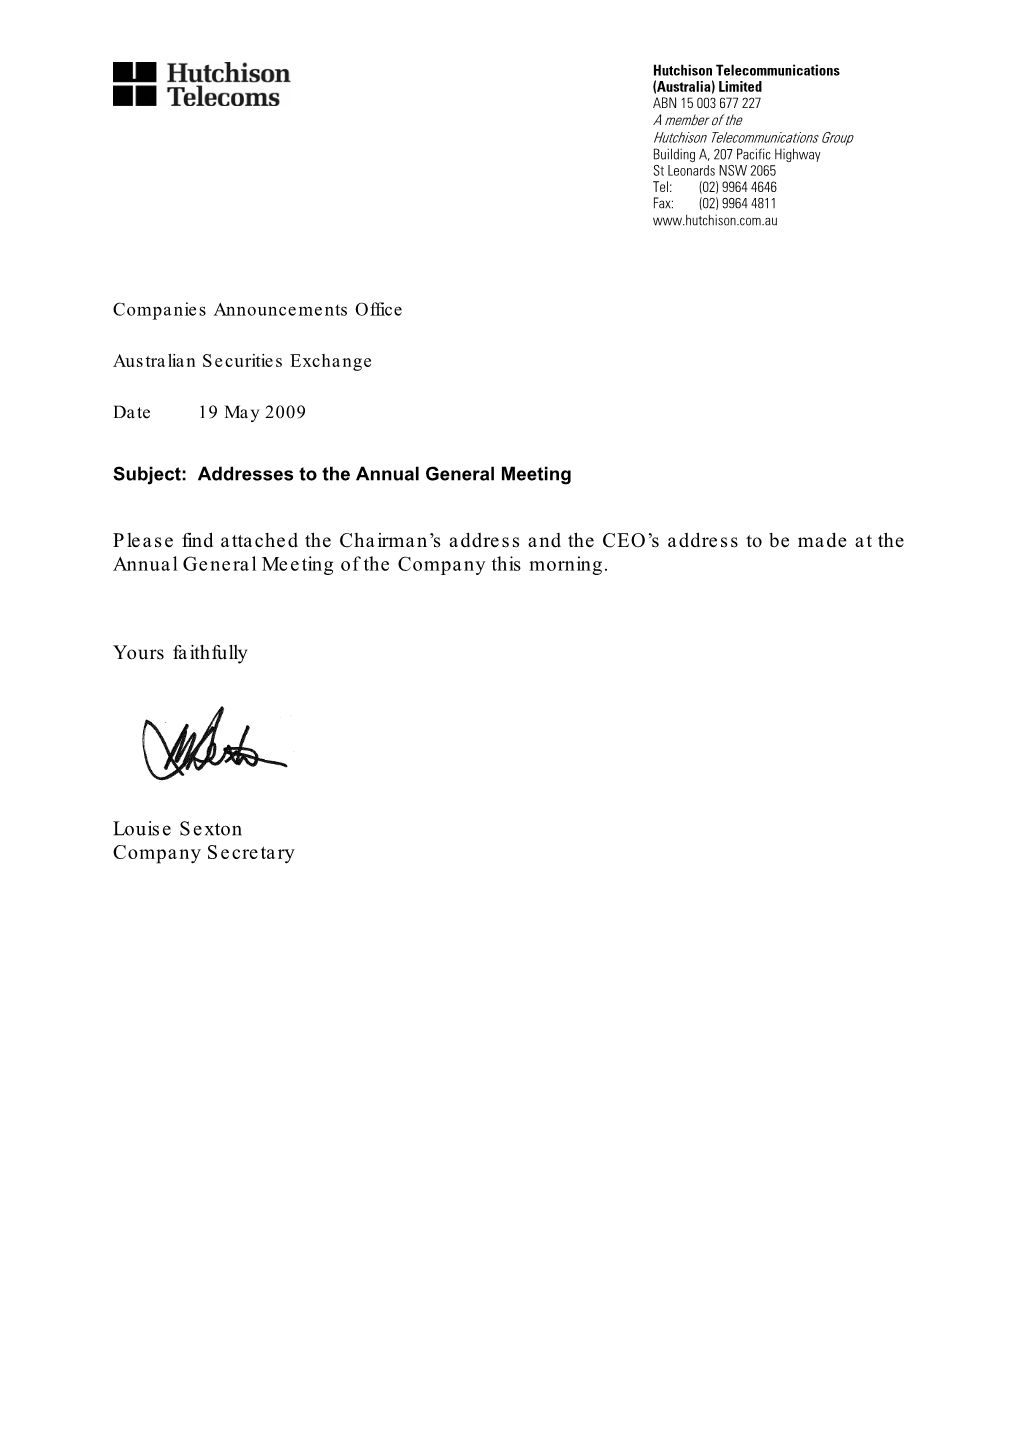 Please Find Attached the Chairman's Address and the CEO's Address To